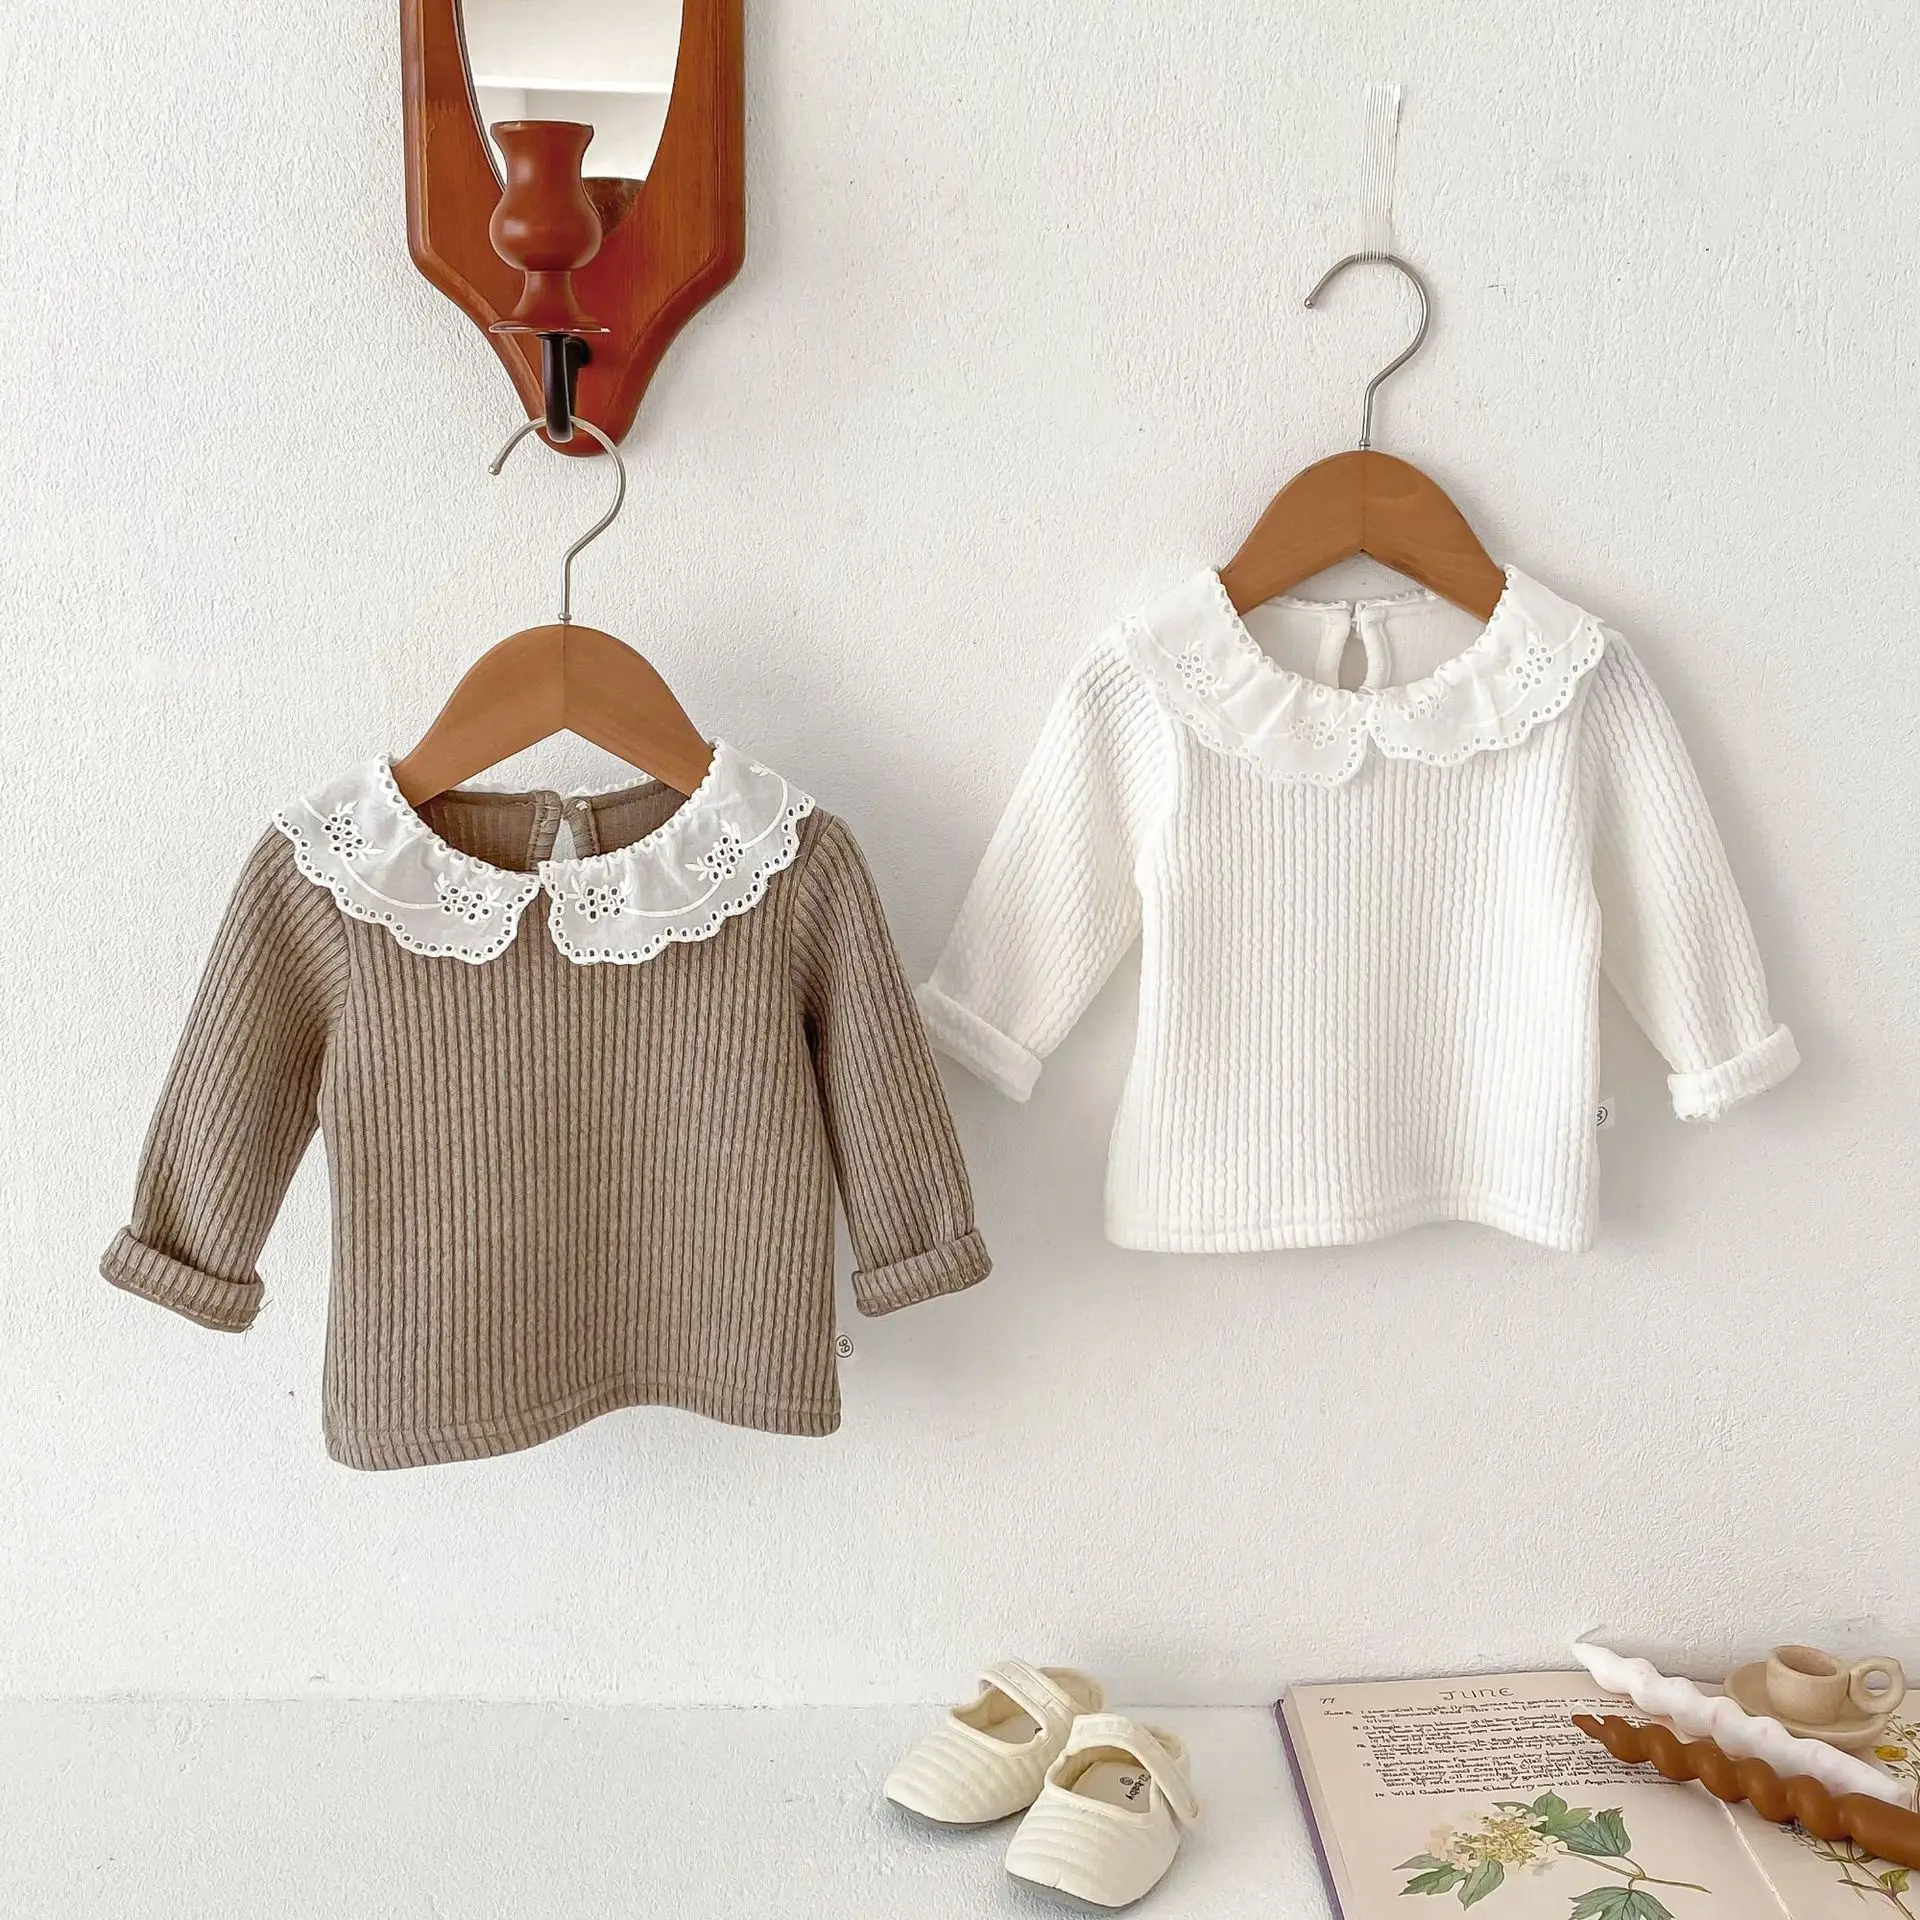 

Spring Autumn Baby Girls Lace Collar Bottoming Shirt Solid Color Cotton Ribbed Long Sleeve Tops 0-2Y Infant Girls Casual Tops